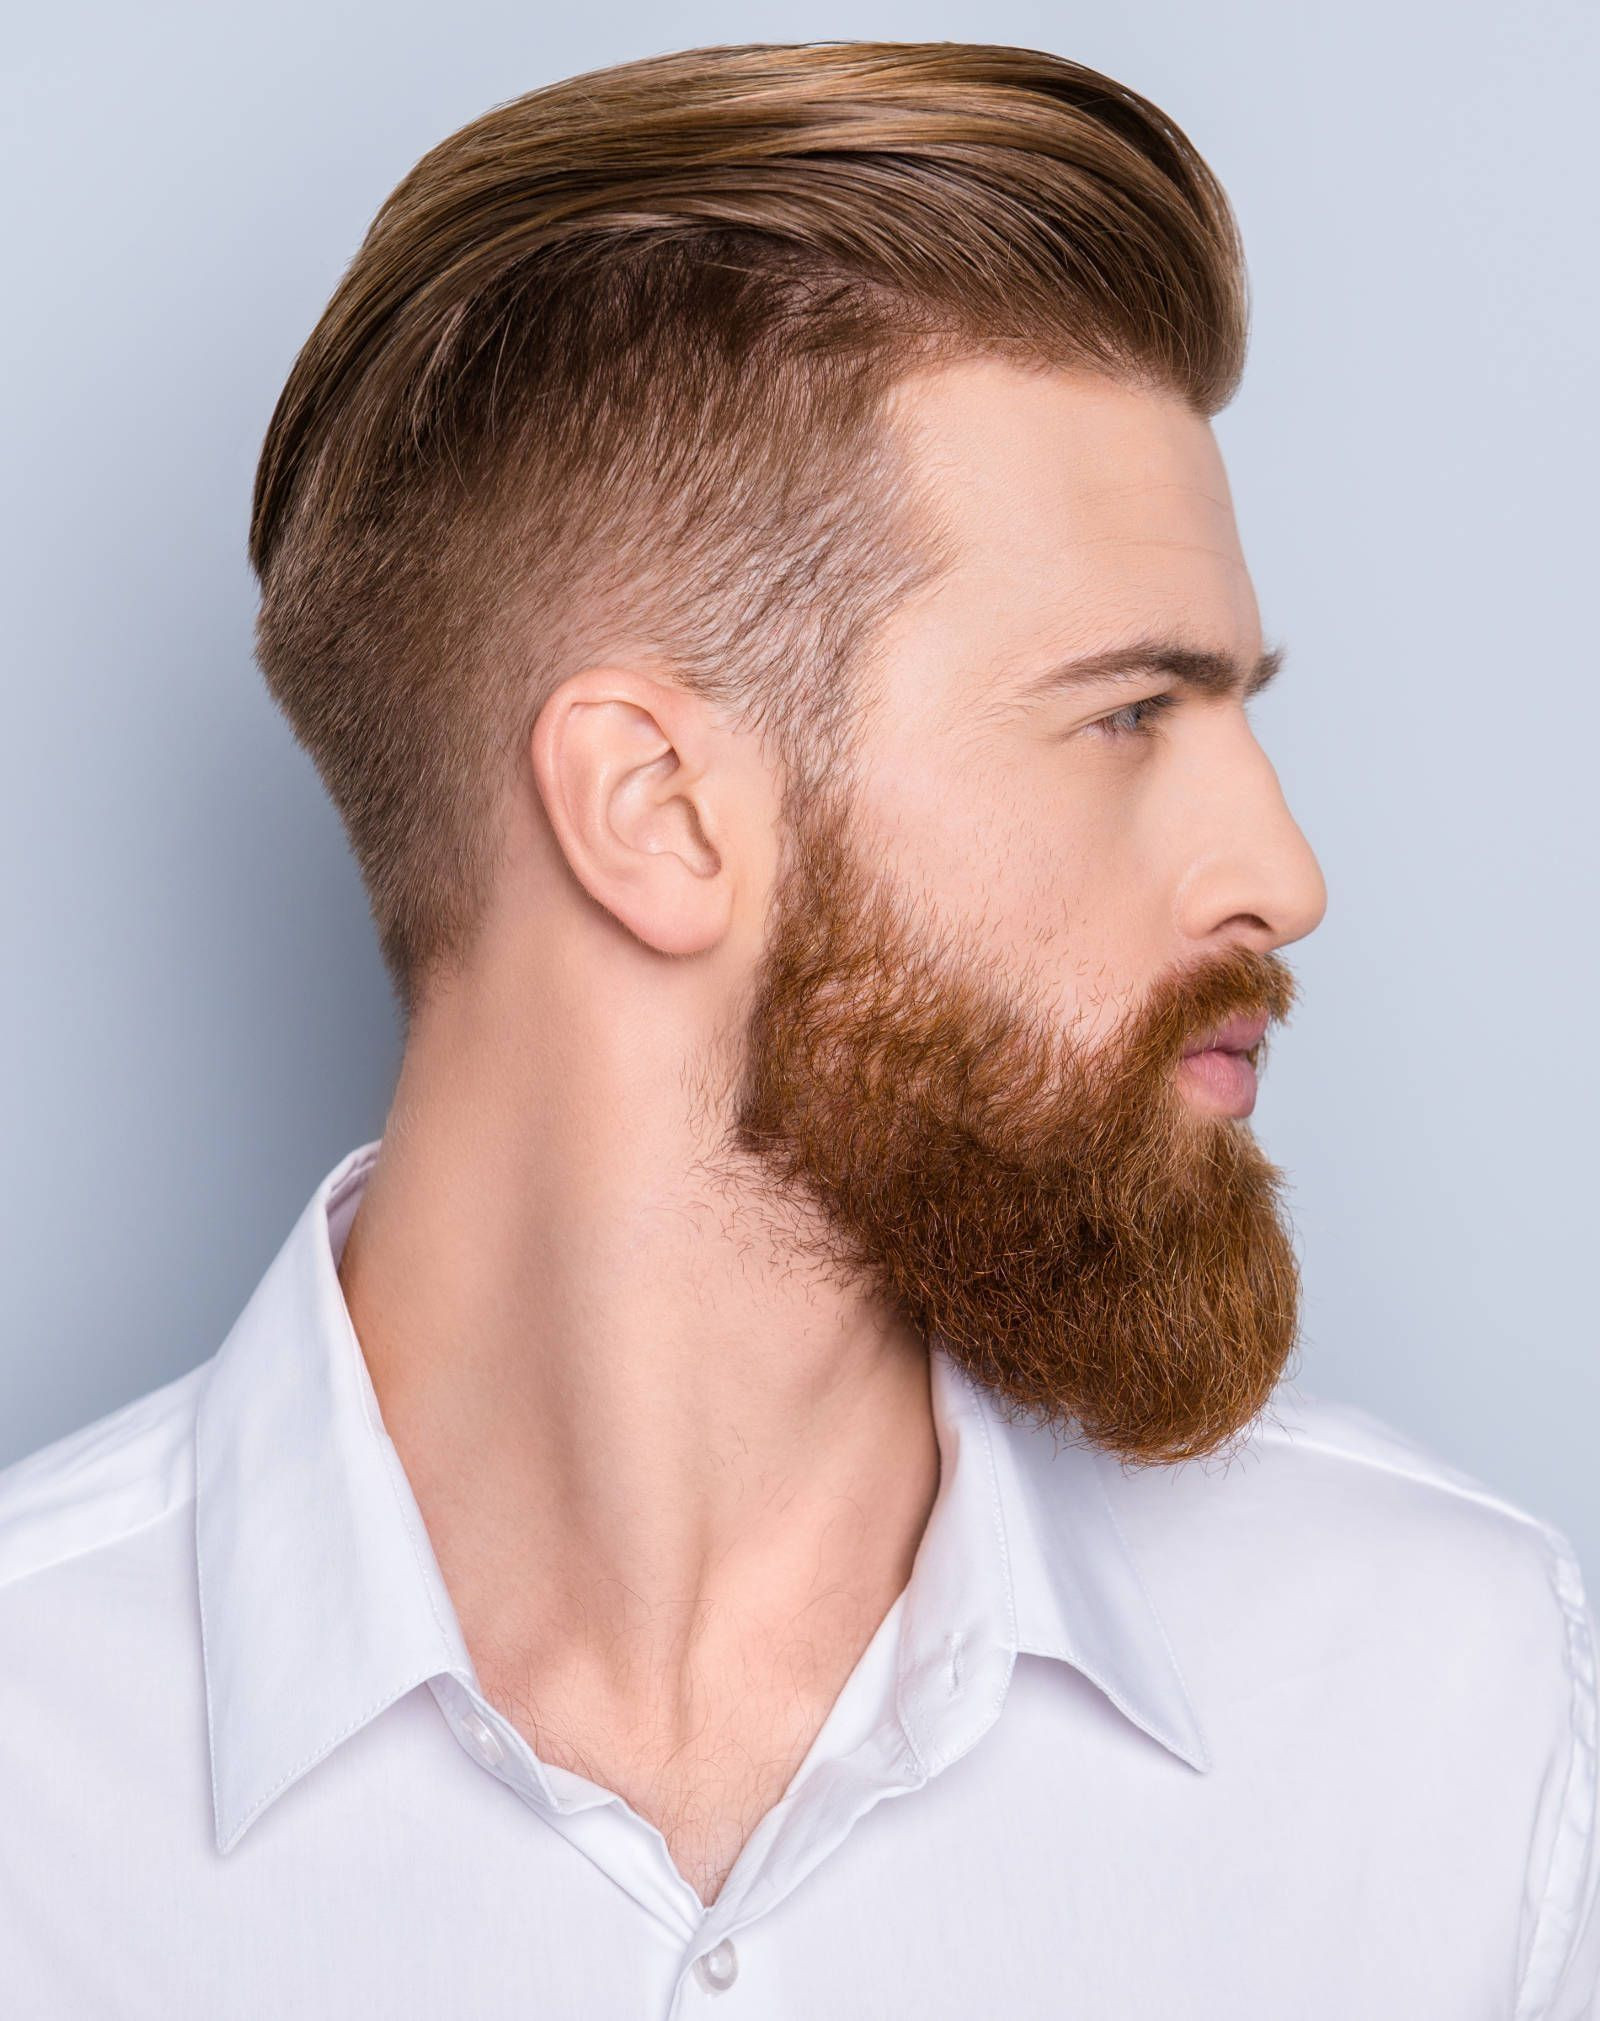 Undercut Hairstyle With Beard
 30 Best Undercut Hairstyles for Men To Look Cool